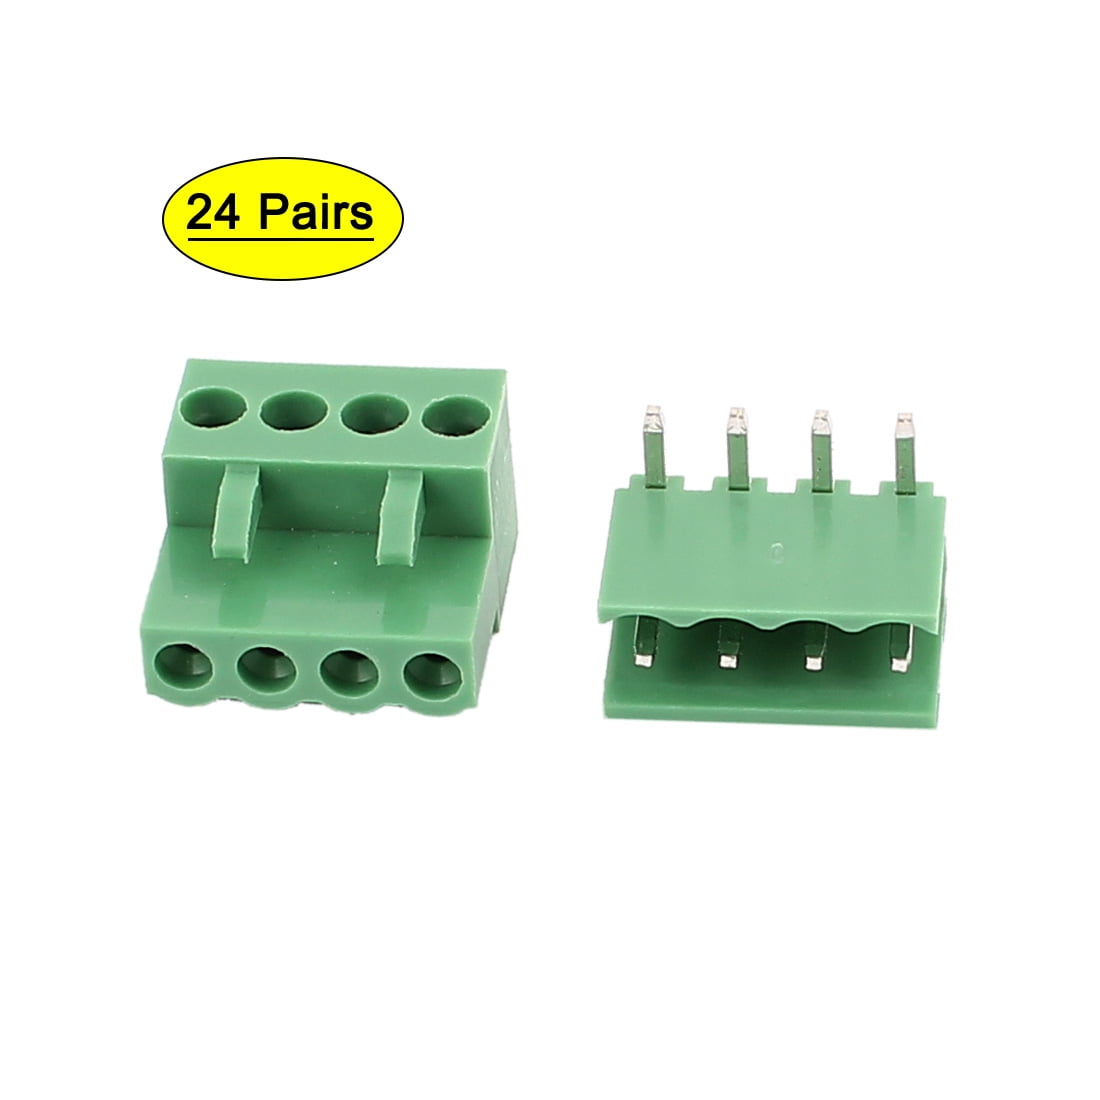 15 pcs 10pin/way Pitch 3.5mm Screw Terminal Block Connector Green Color Pluggable Type with straight-pin 